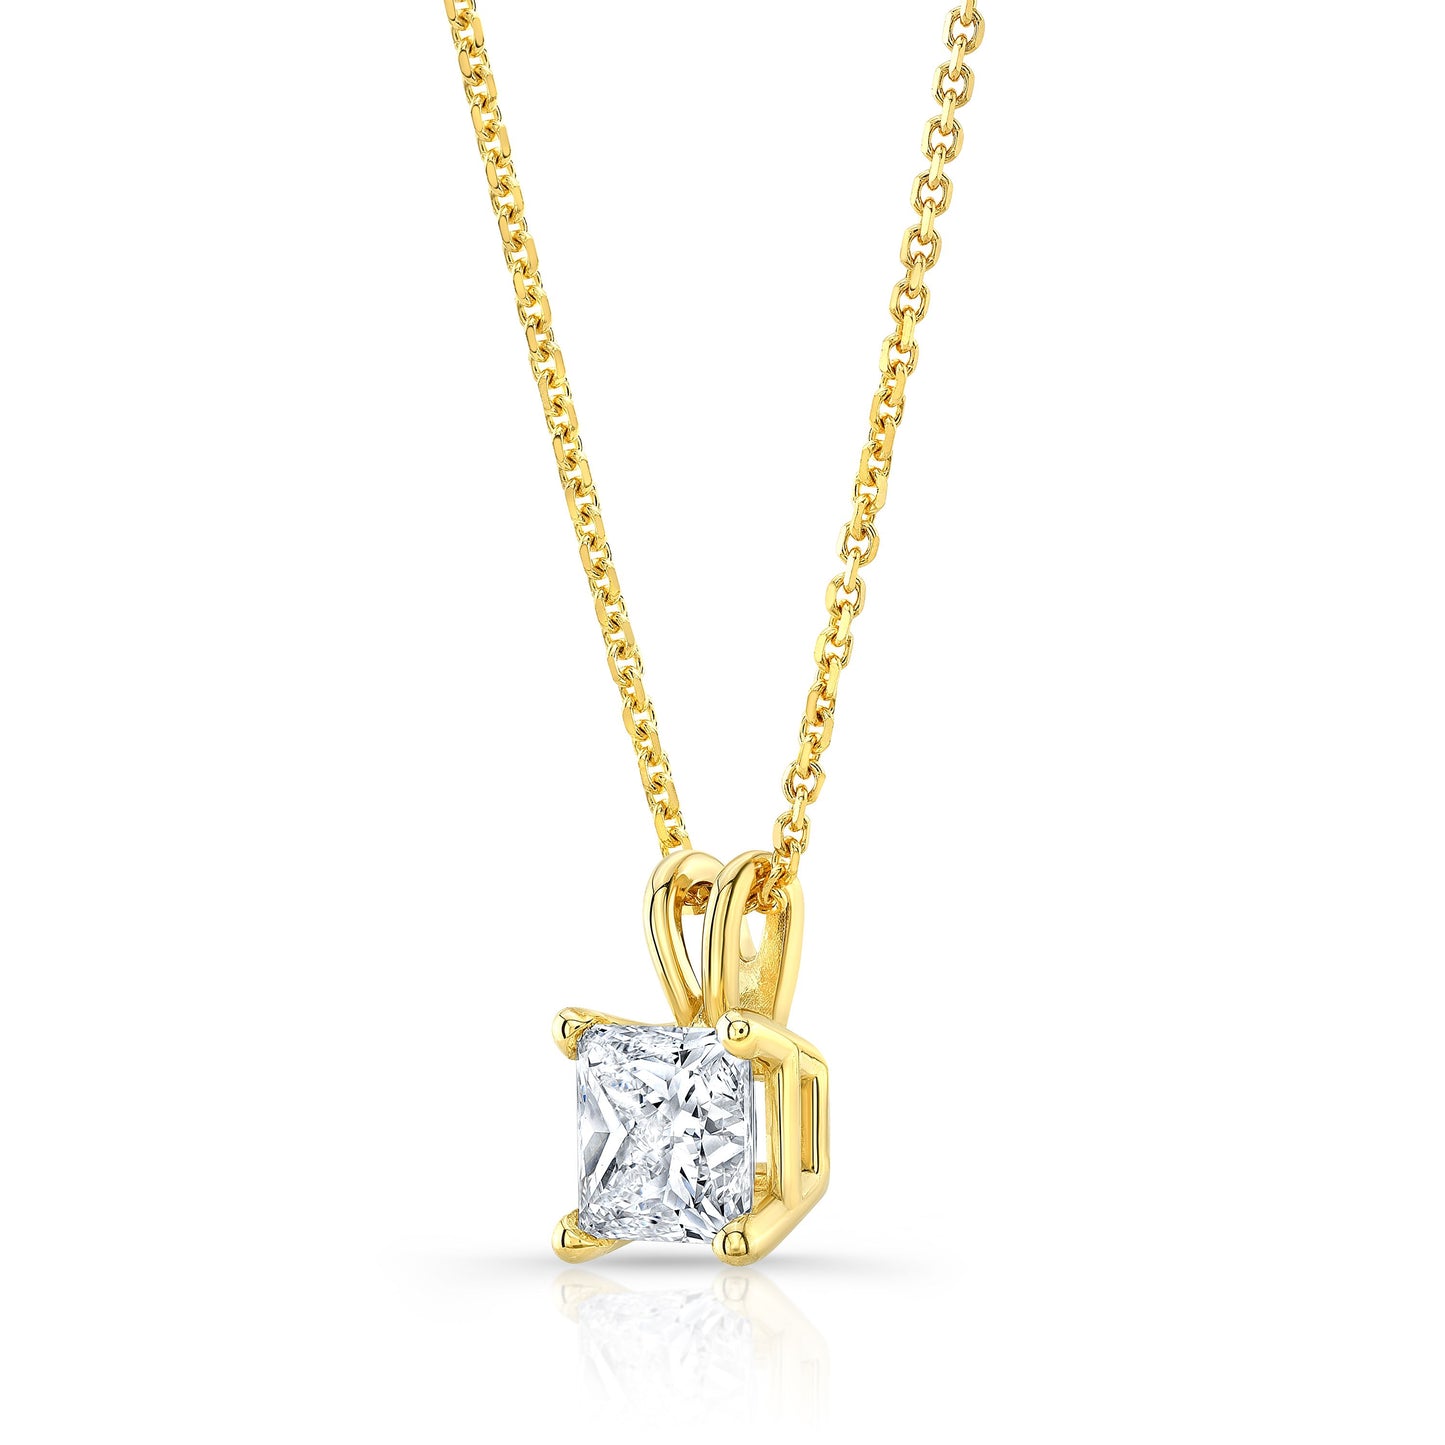 Princess Diamond Solitaire Pendant In A 14k Yellow Gold 4-prong Basket Setting, 2ct. T.w. (hi, Si1-si2)